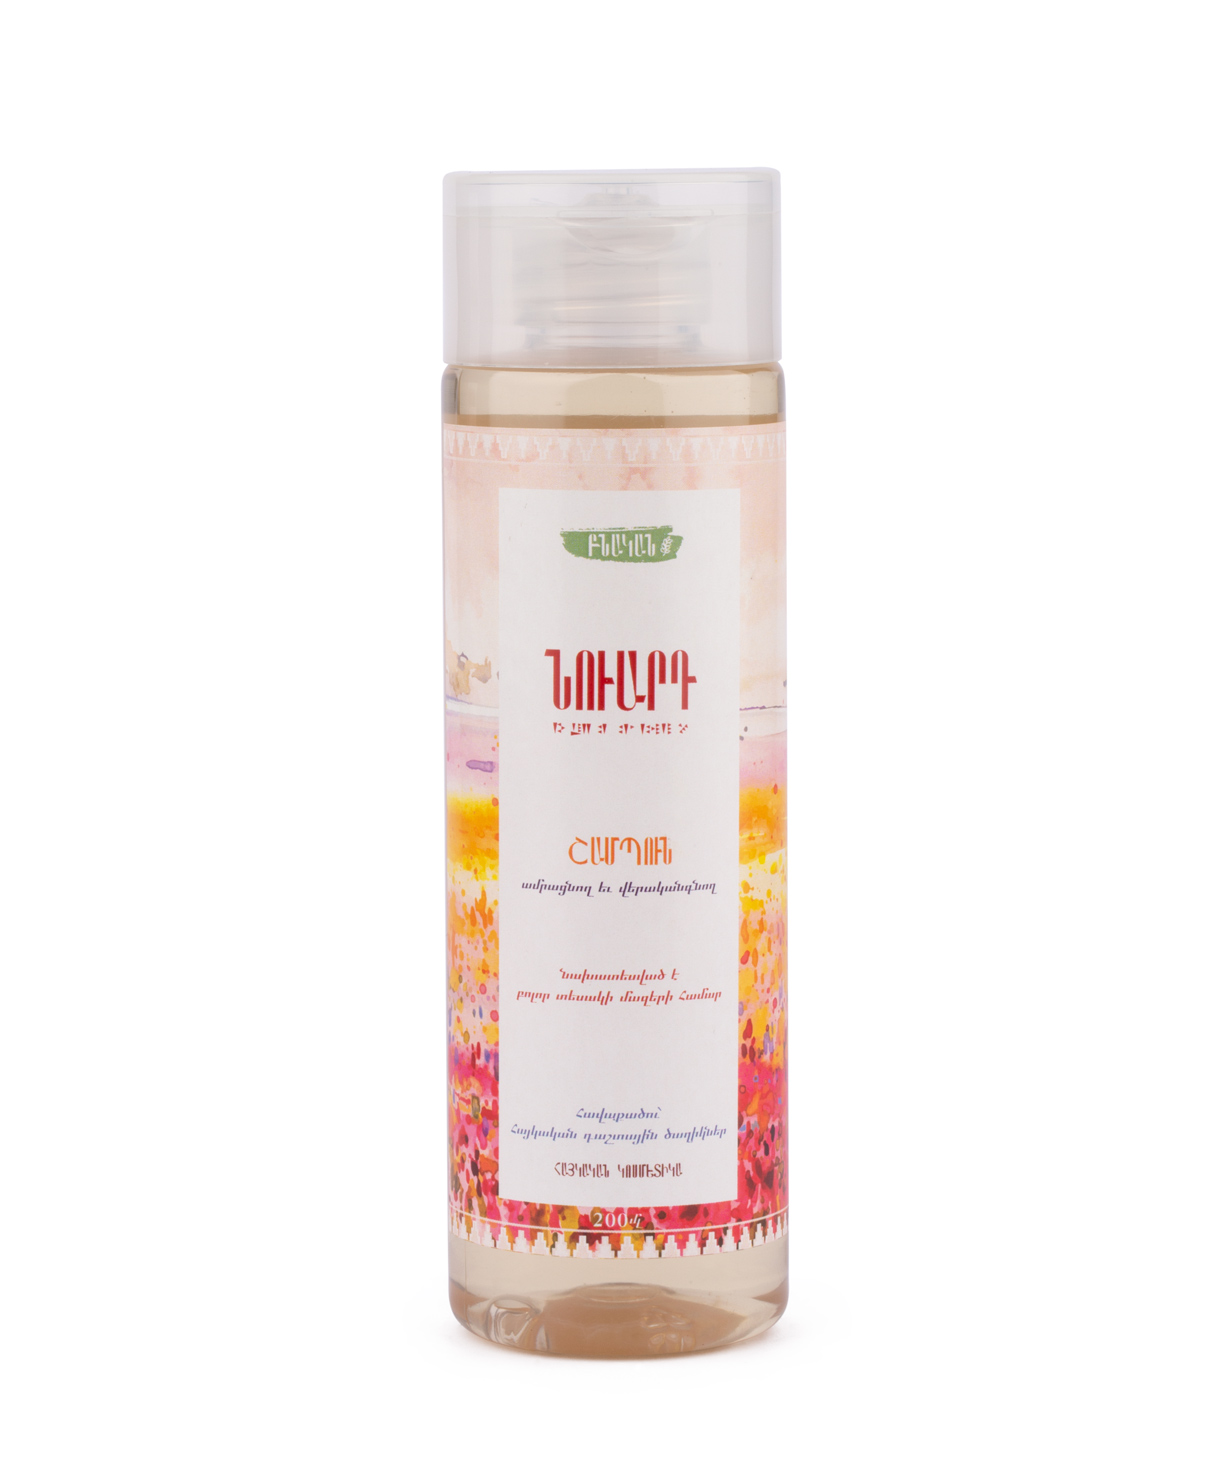 Shampoo `Nuard` strengthening and revitalizing with wildflowers